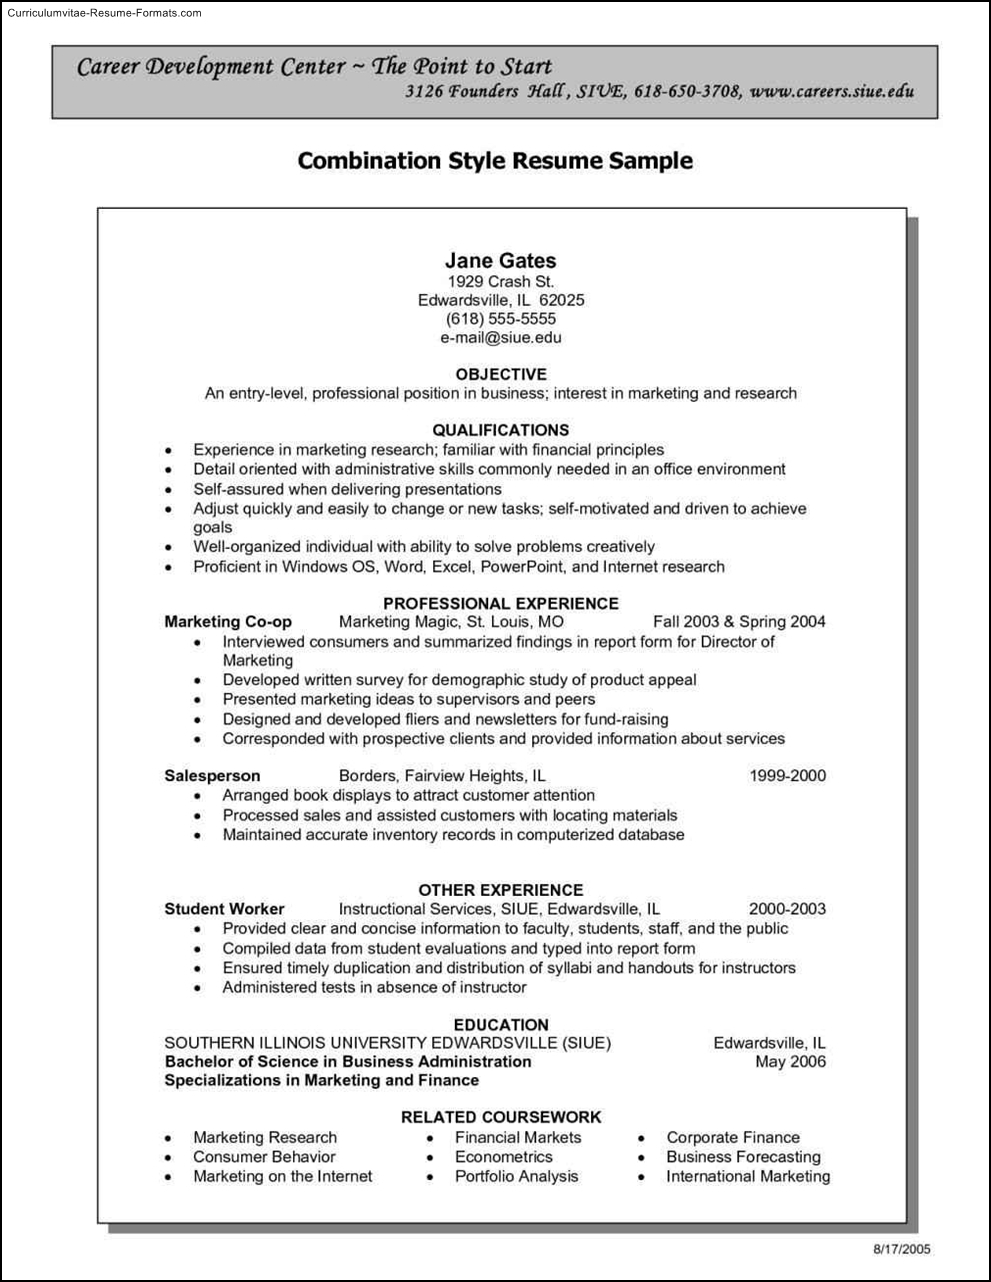 Making A Resume With Word | Resume Creator Online Inside Combination Resume Template Word